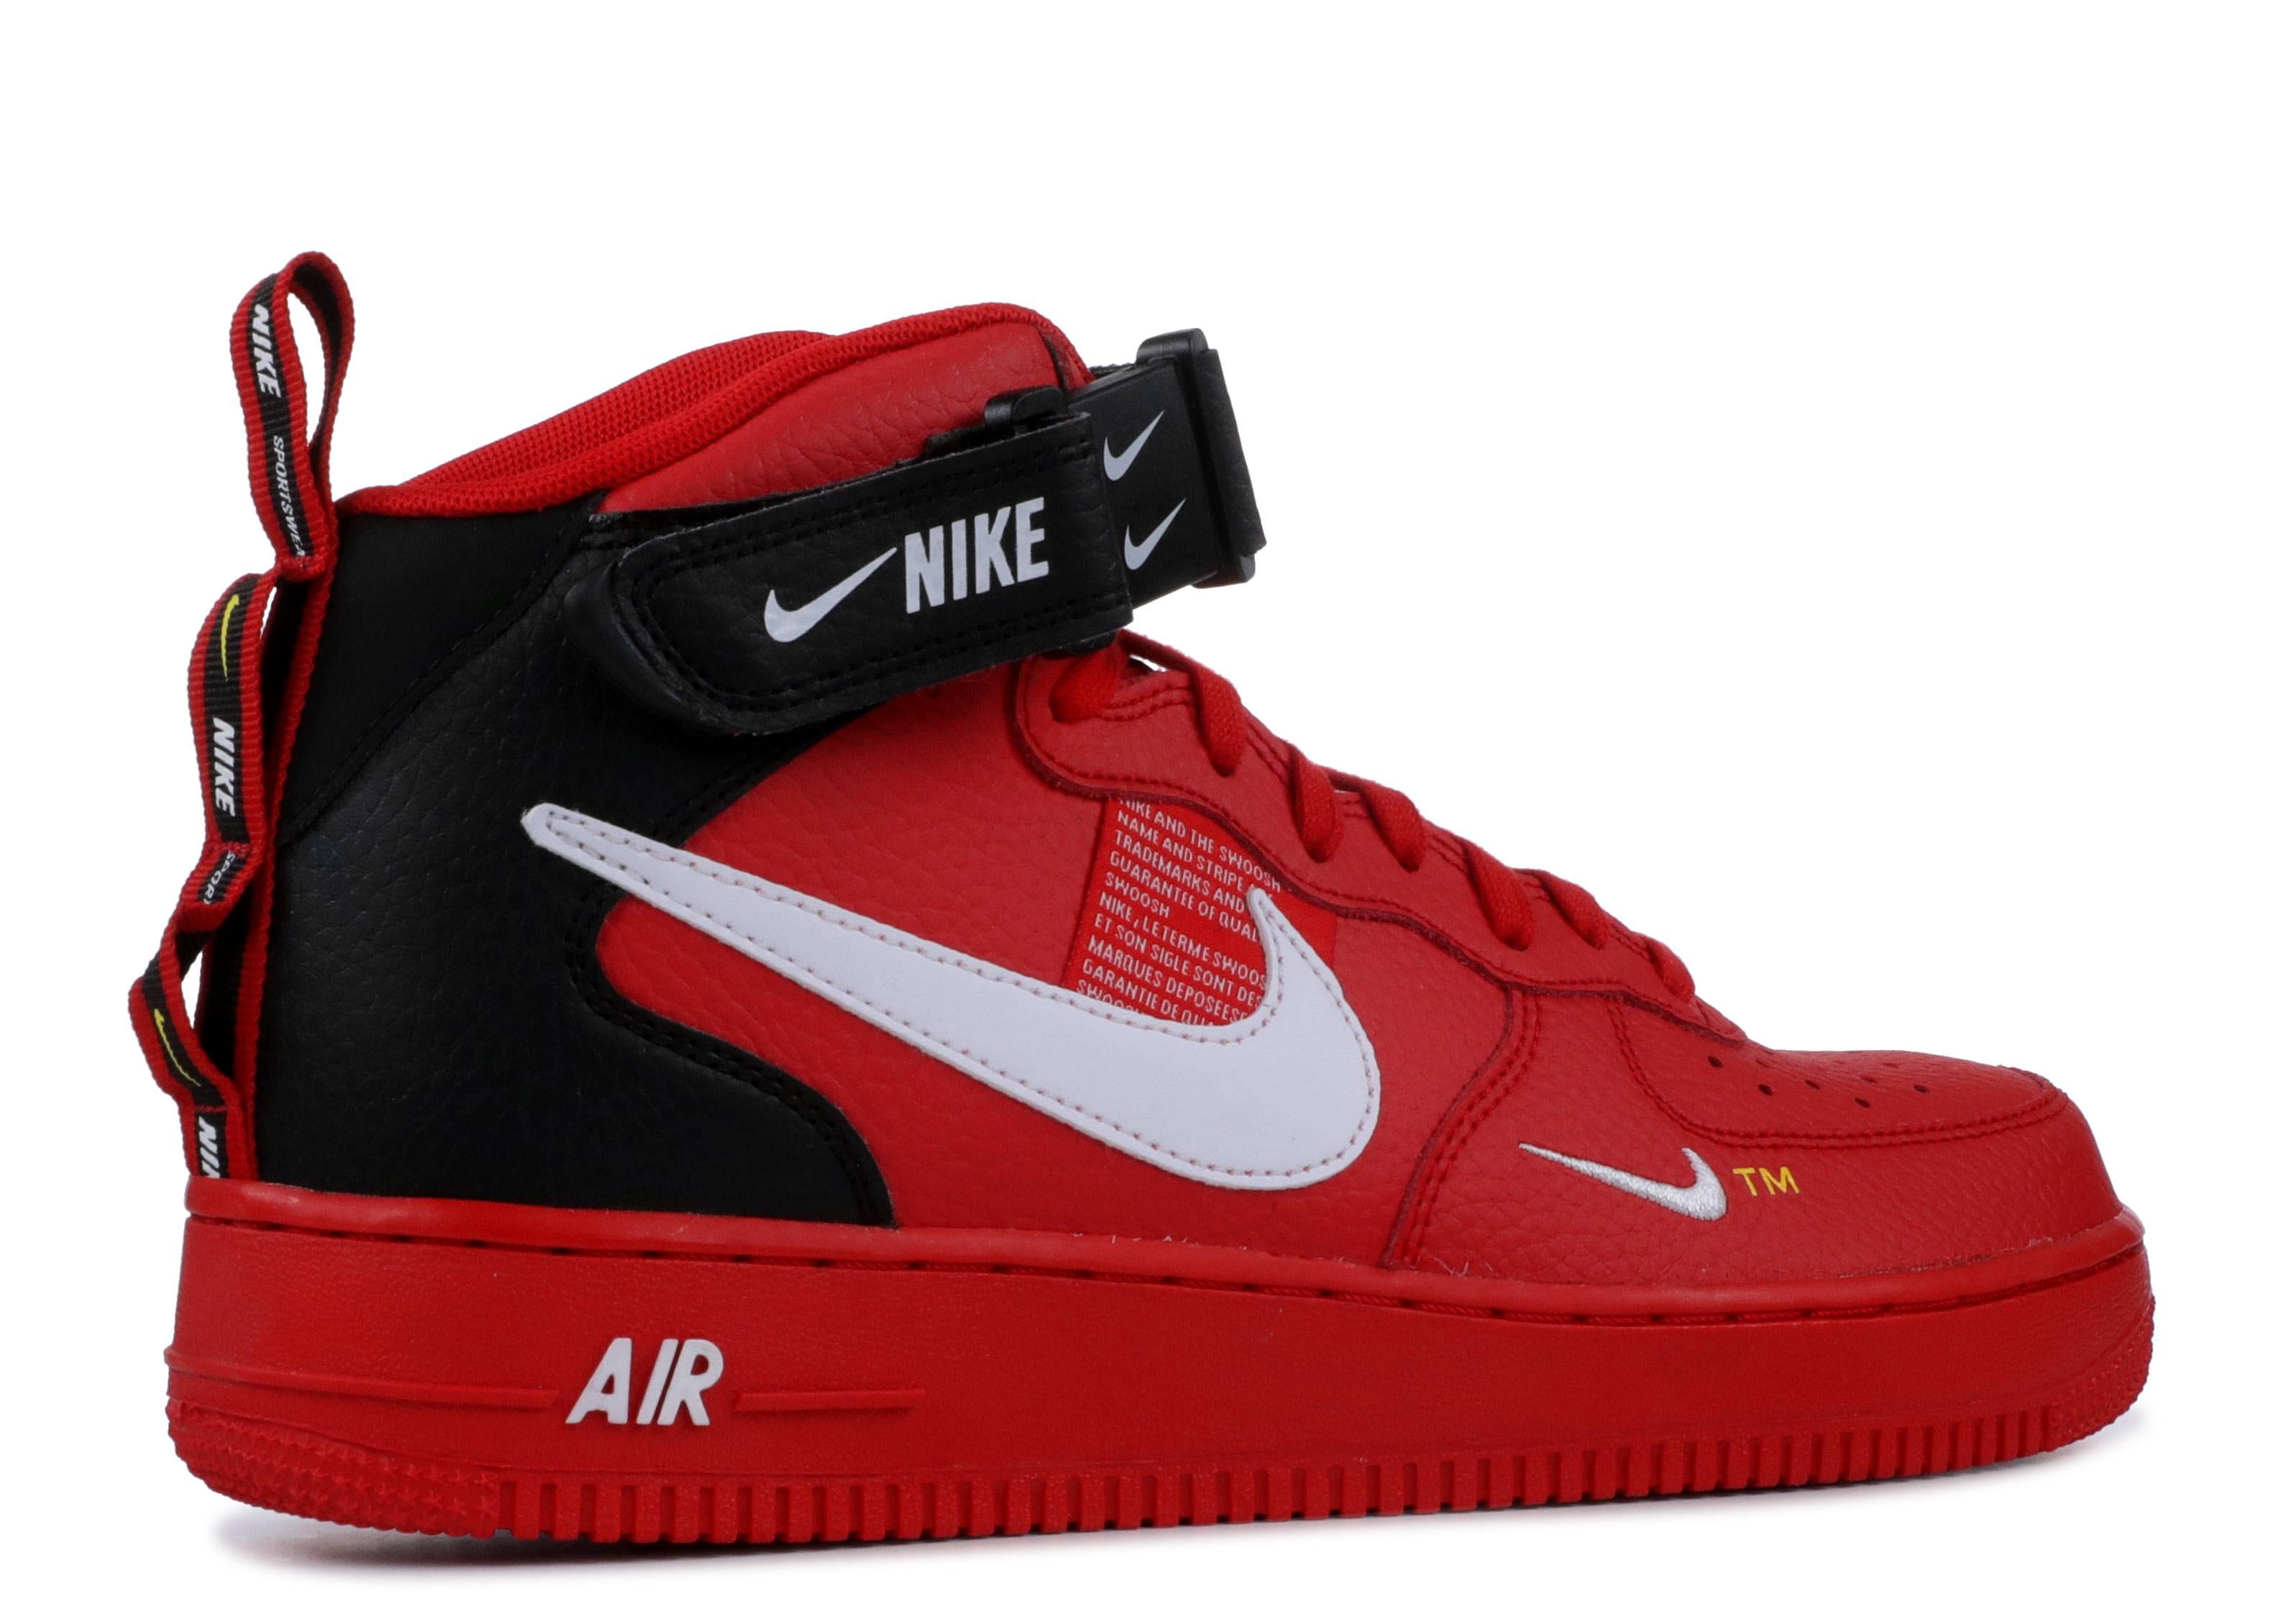 Nike Air Force 1 Mid 07 Lv8 in Red 